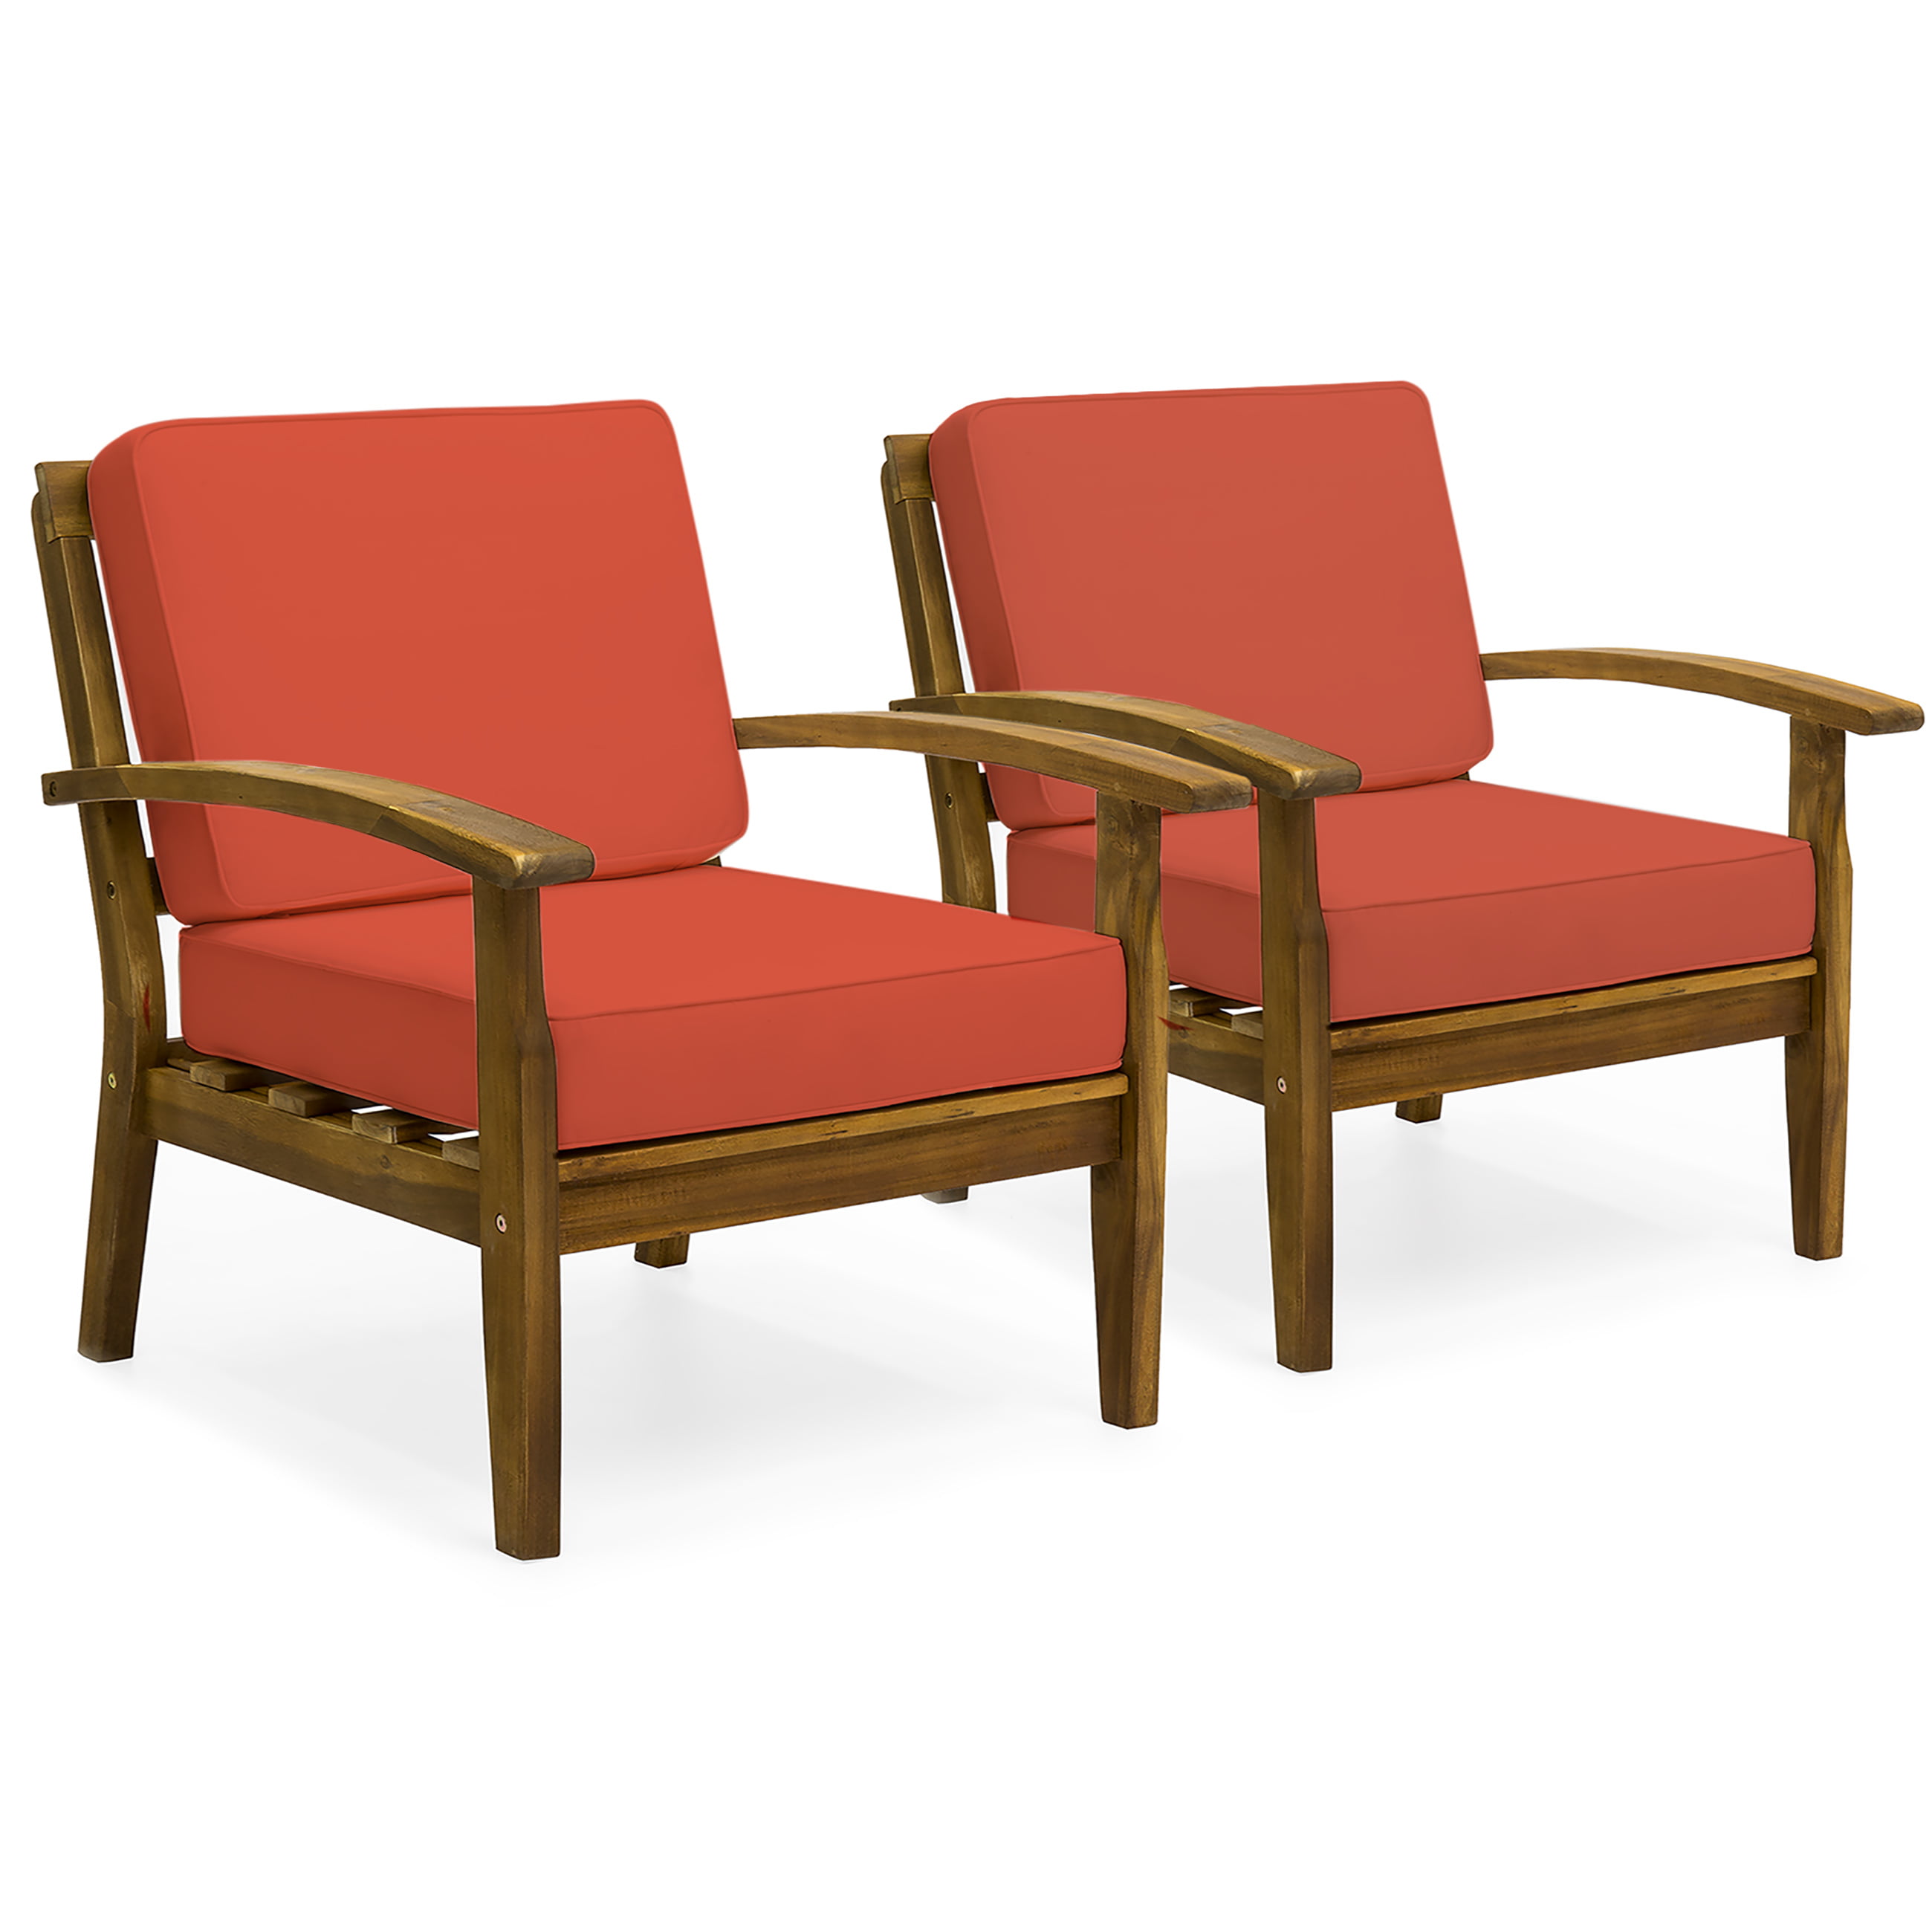 Outdoor Acacia Wood Club Chairs, Outdoor Wood Chairs With Cushions